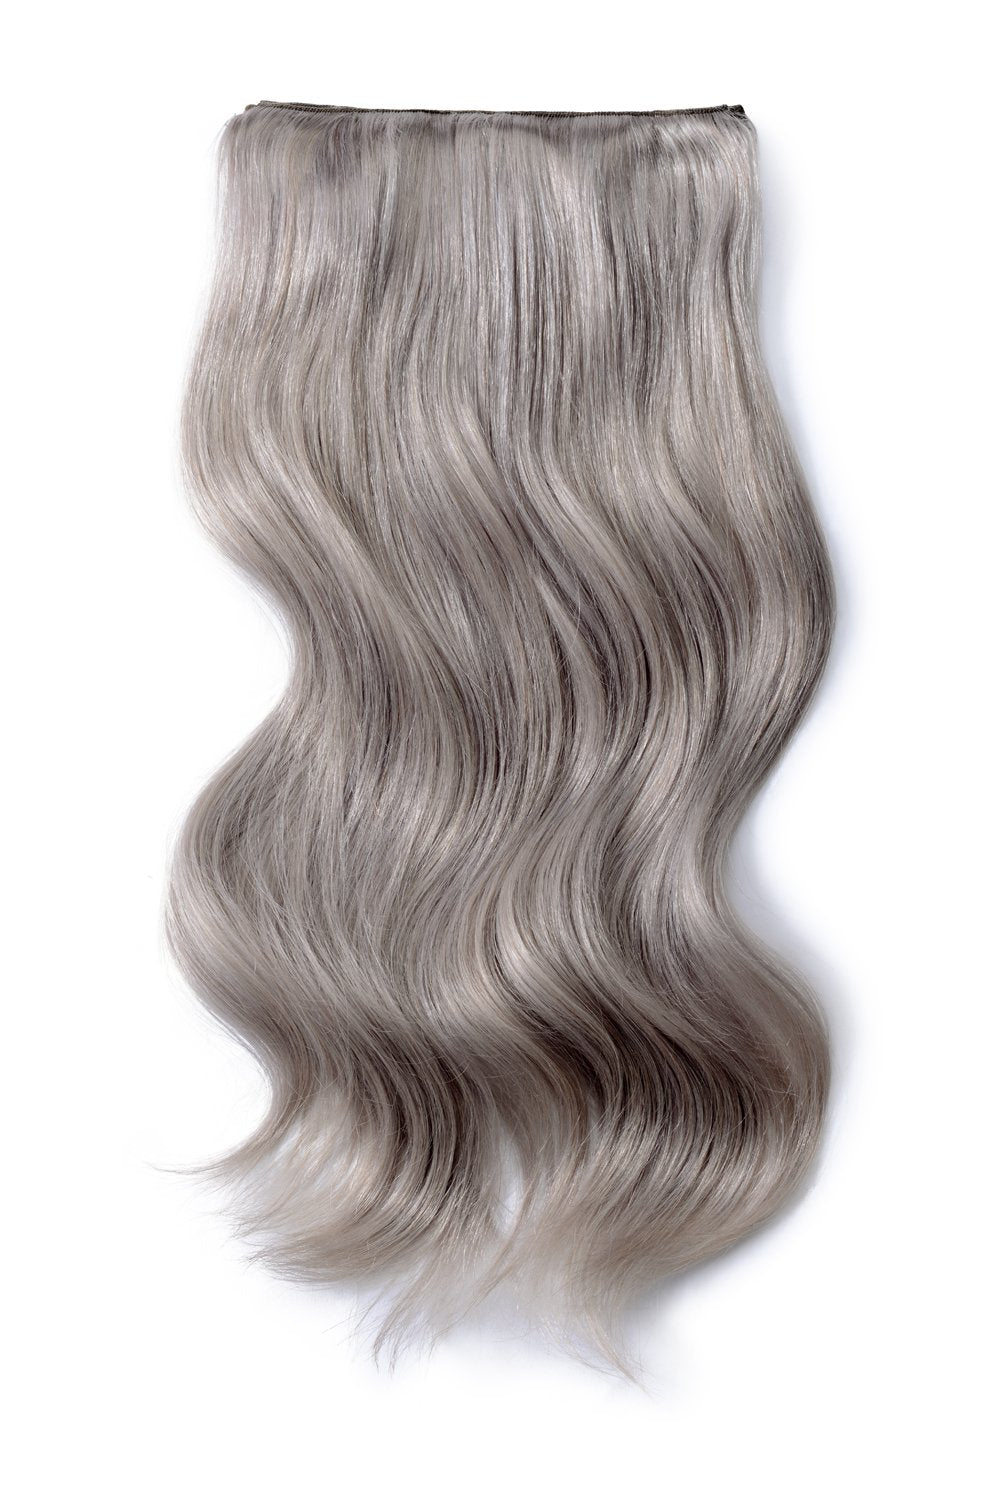 Double Wefted Full Head Remy Clip in Human Hair Extensions - Silver/Grey Hair (#SG)